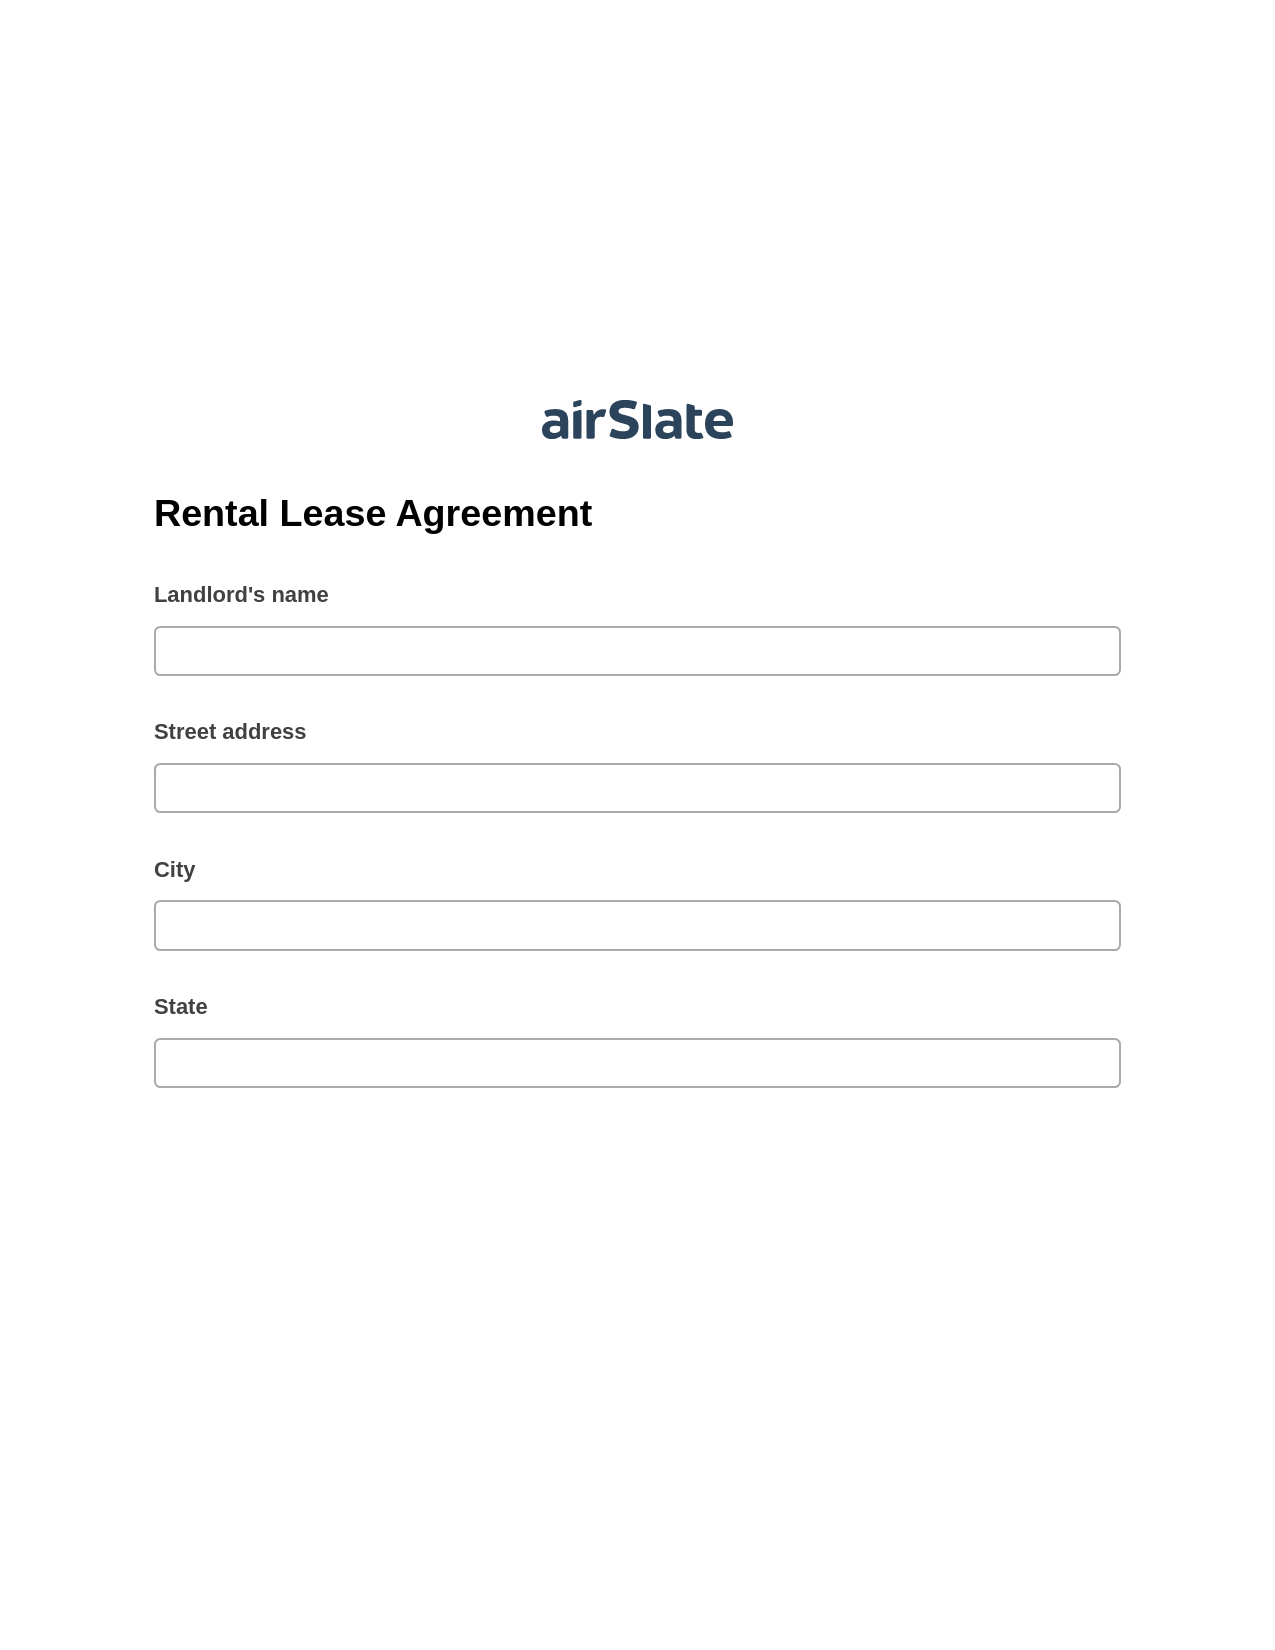 Rental Lease Agreement Pre-fill from Google Sheet Dropdown Options Bot, Invoke Salesforce Process Bot, Archive to SharePoint Folder Bot